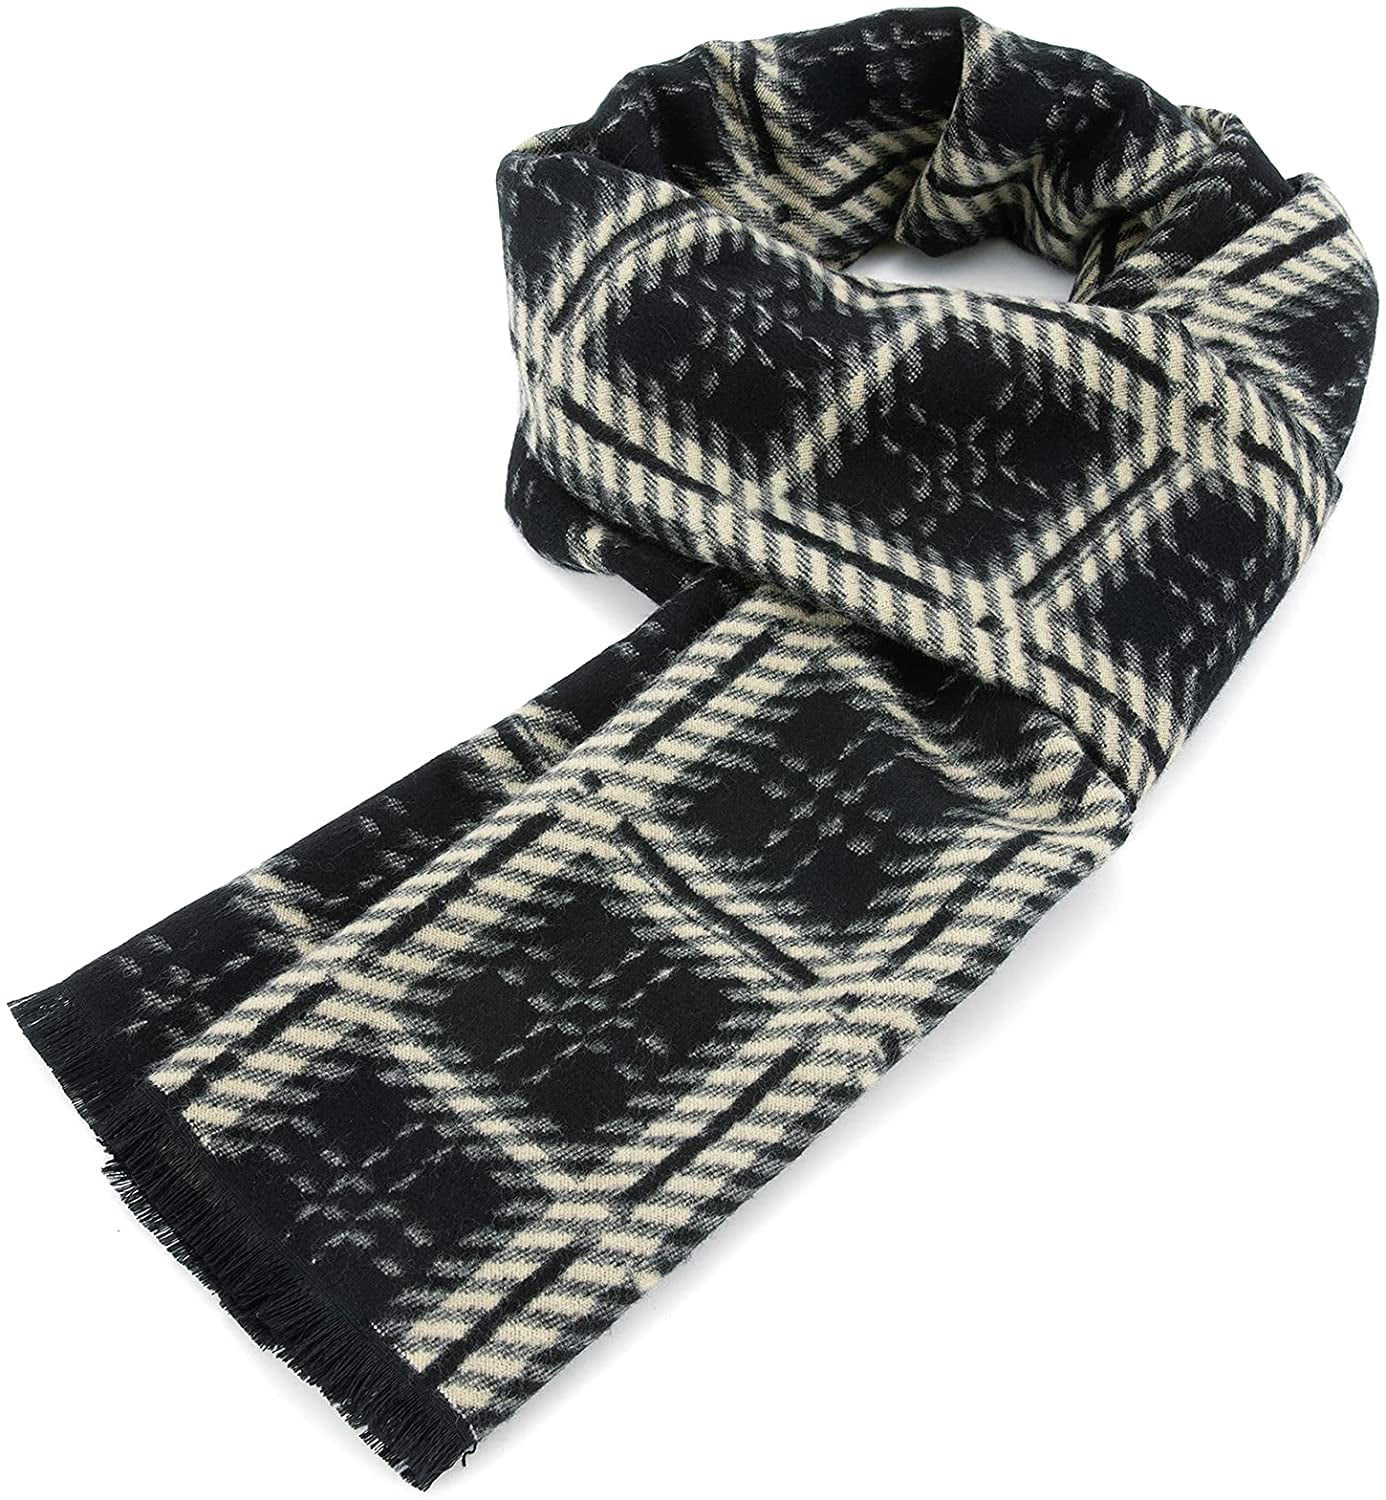 3 Pieces Faux Cashmere Feel Winter Plaid Scarf Warm Shawls Scarves for Men and Women 